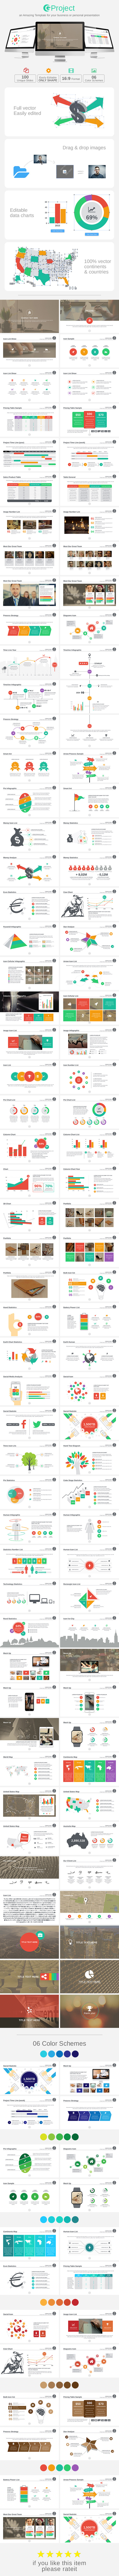 GProject PowerPoint Template